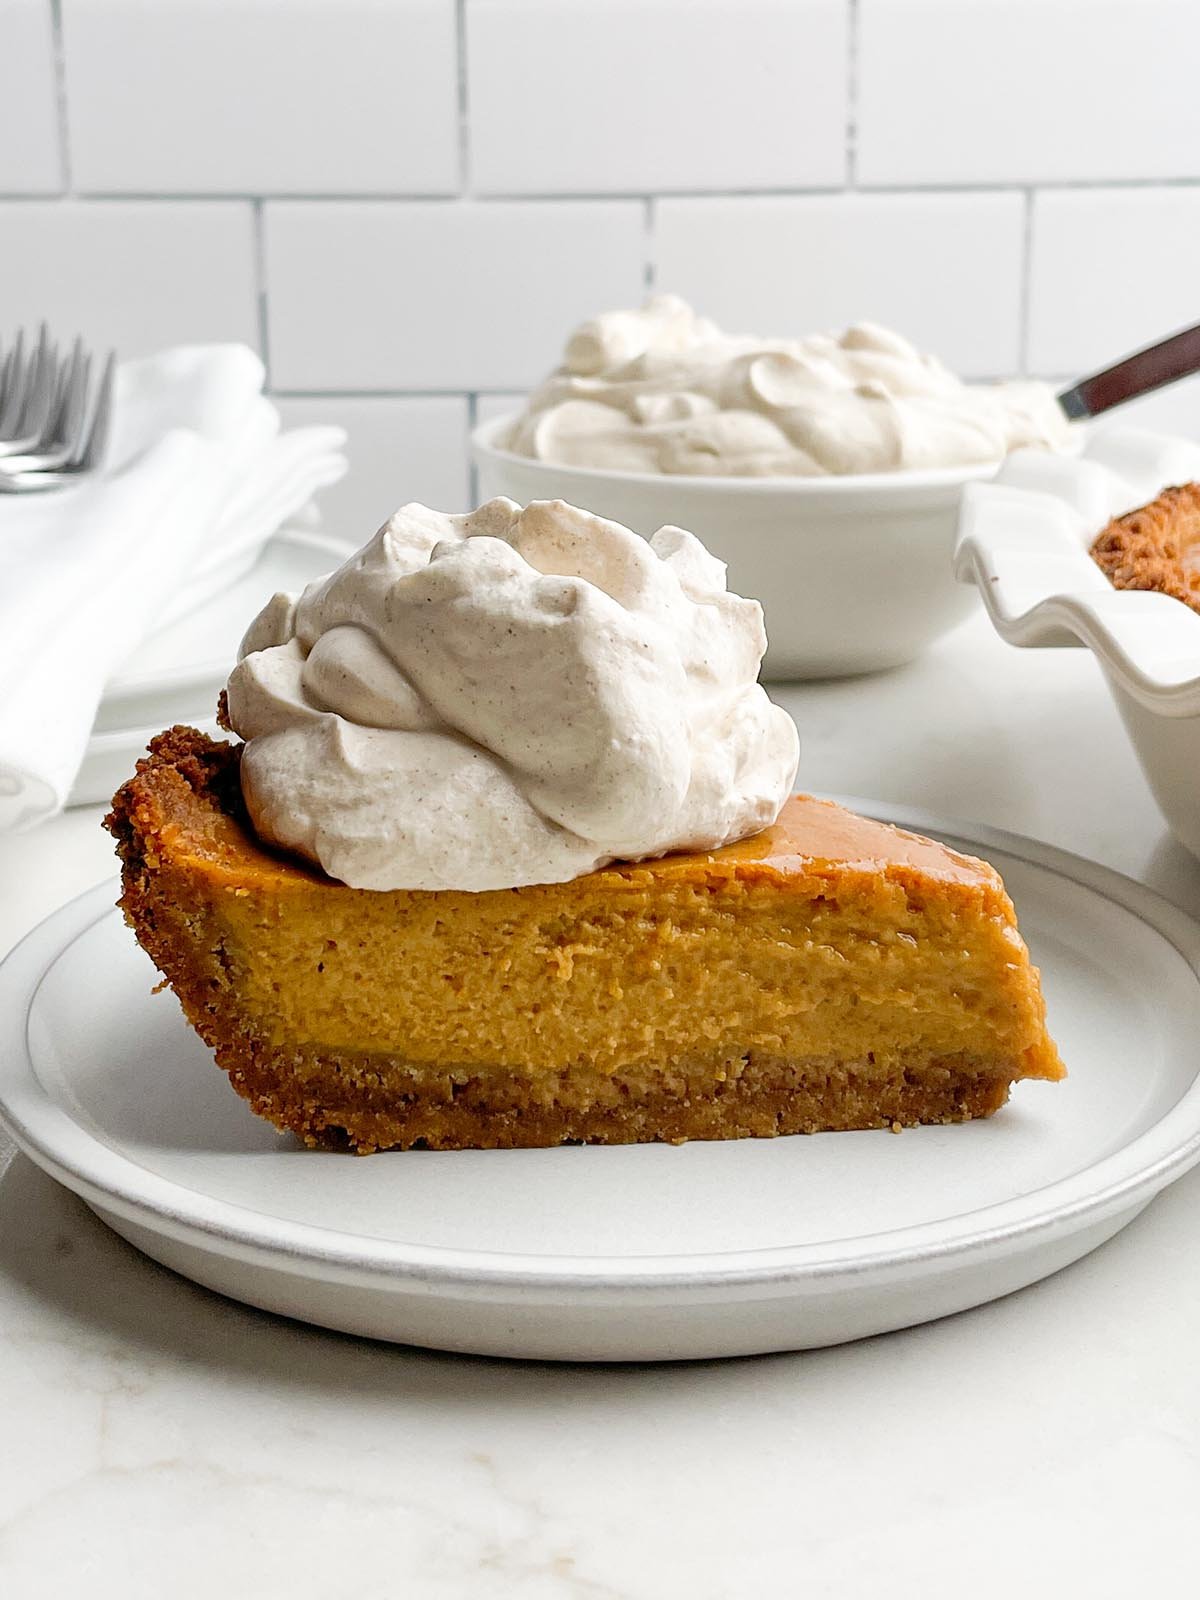 piece of pumpkin pie with graham cracker crust with a dollop of cinnamon brown sugar whipped cream.